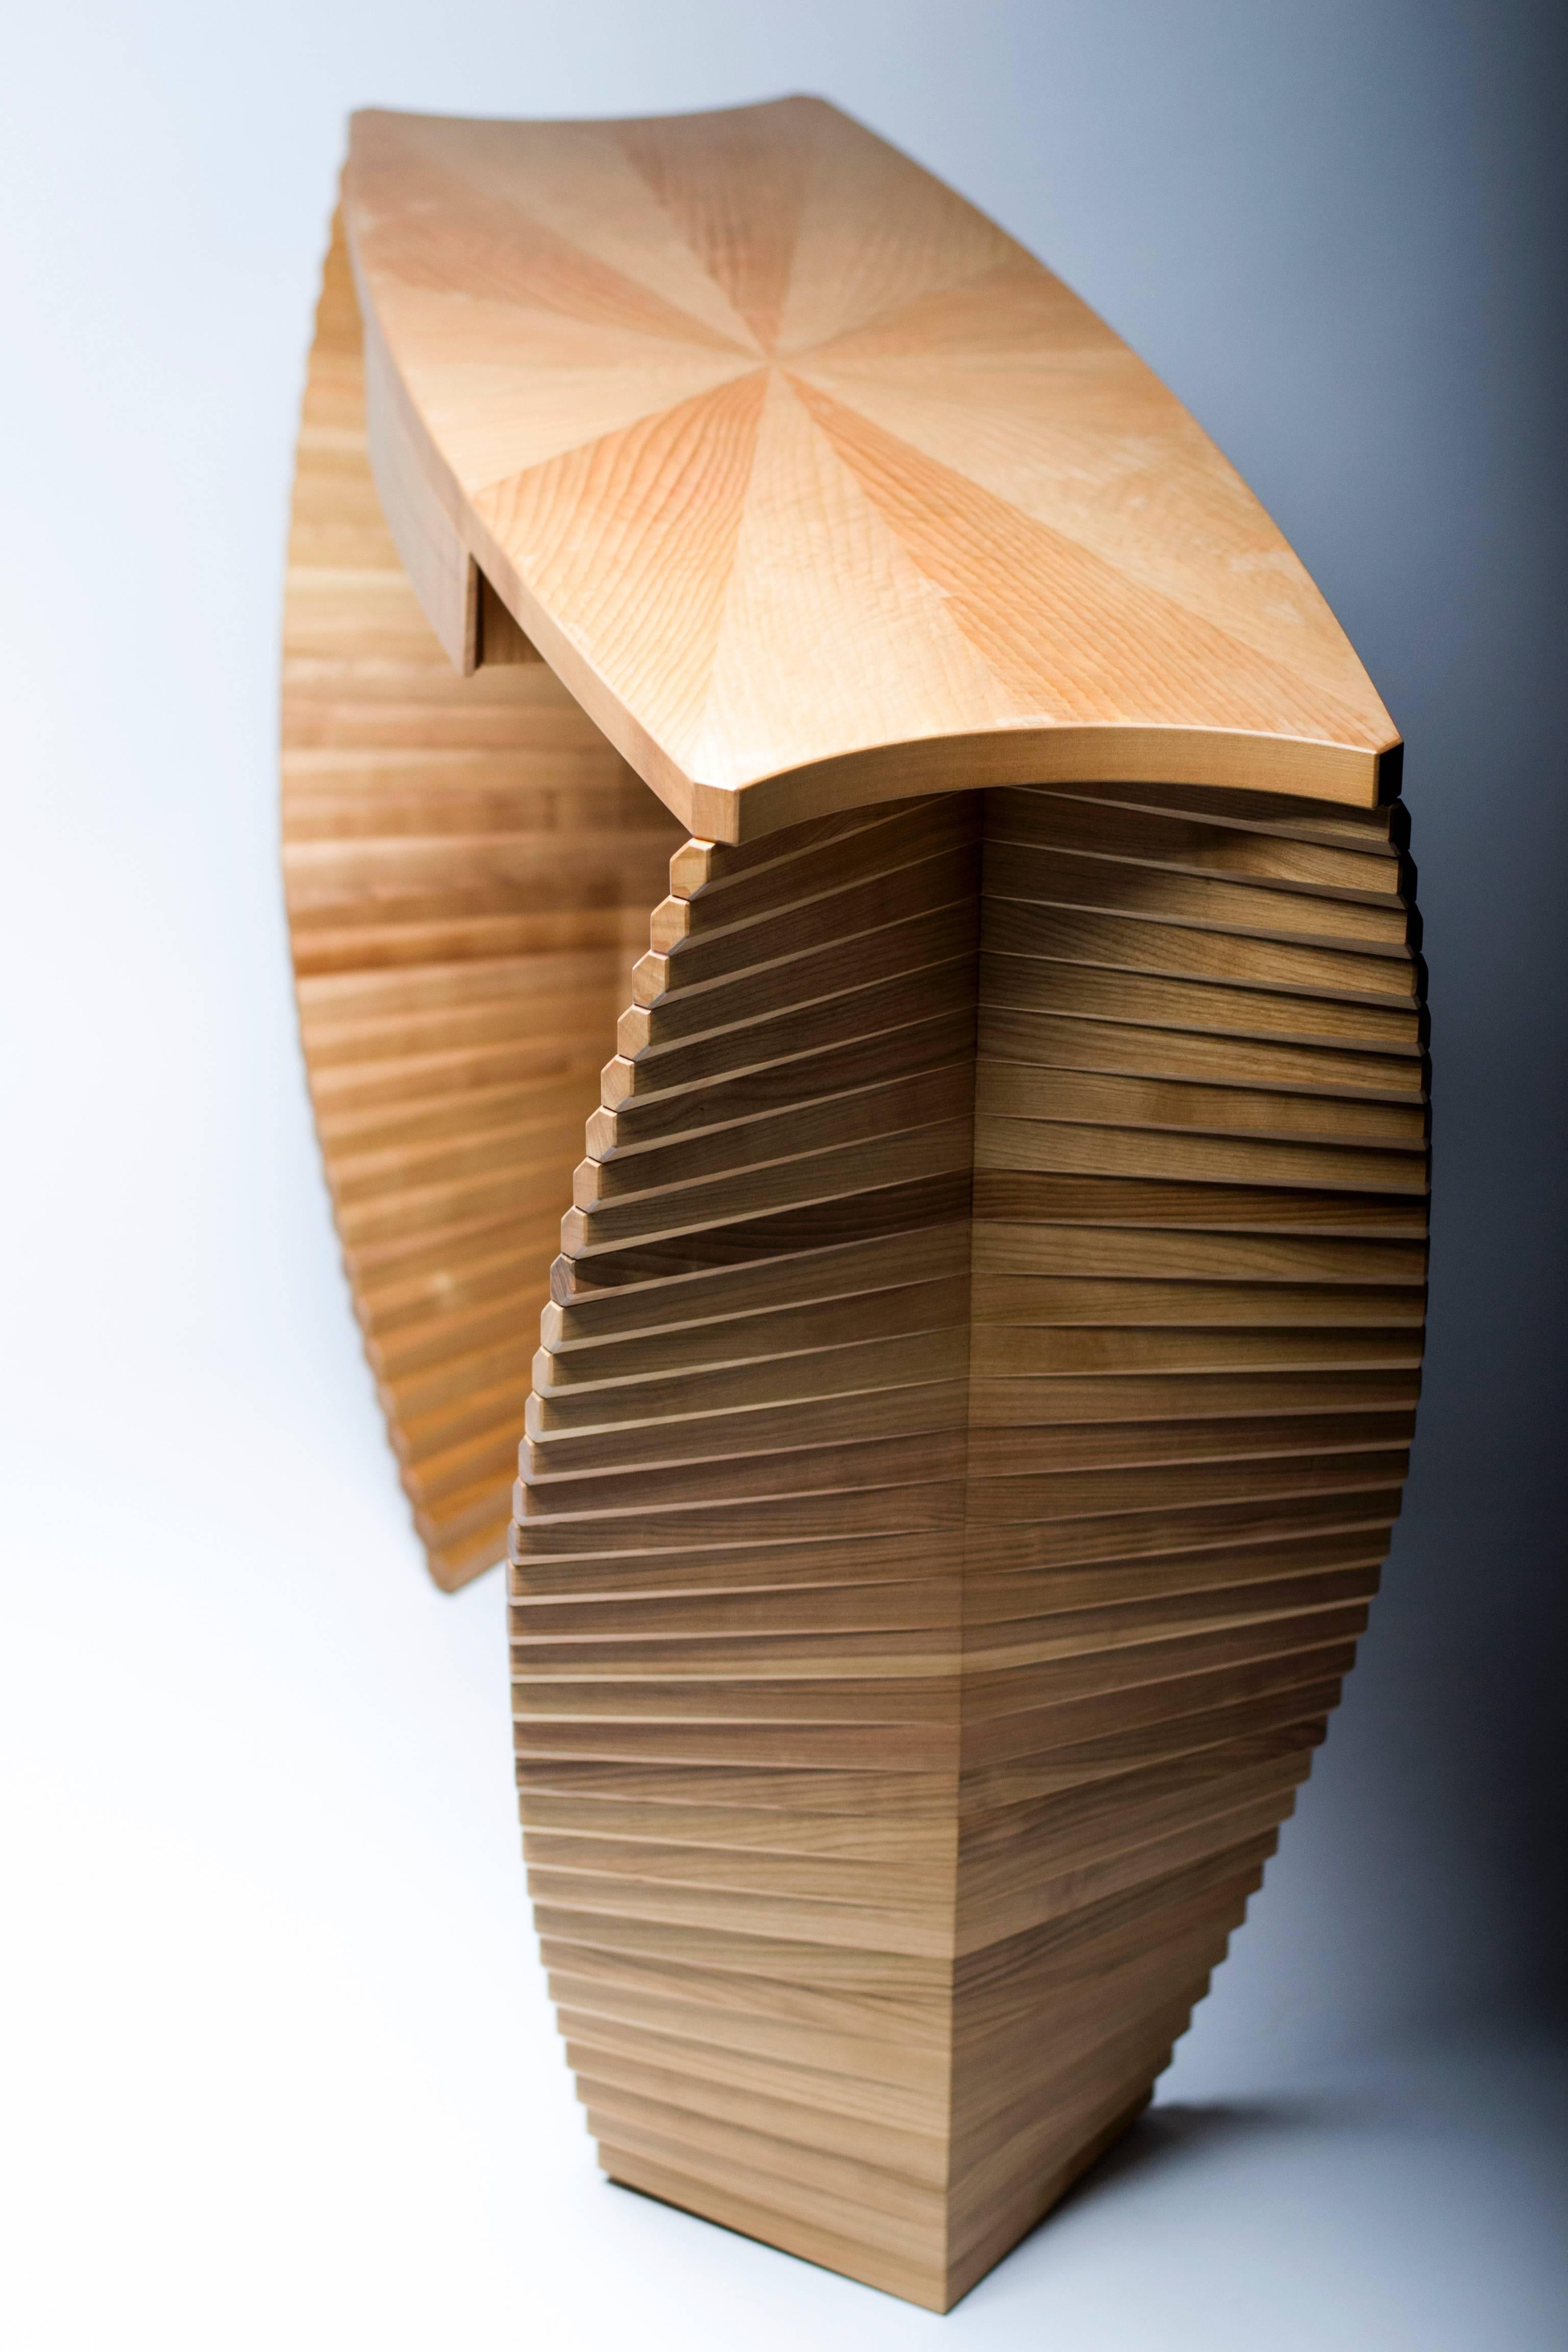 Jan Waterson. 
Title: Linear Ellipse.
Materials - English cherry, Cedar of Lebanon, English Ash.
Dimensions: 85 x 112 x 36 cm.

Linear Ellipse was conceived through exploring the concept of rotation. Straight components have been sculpted and